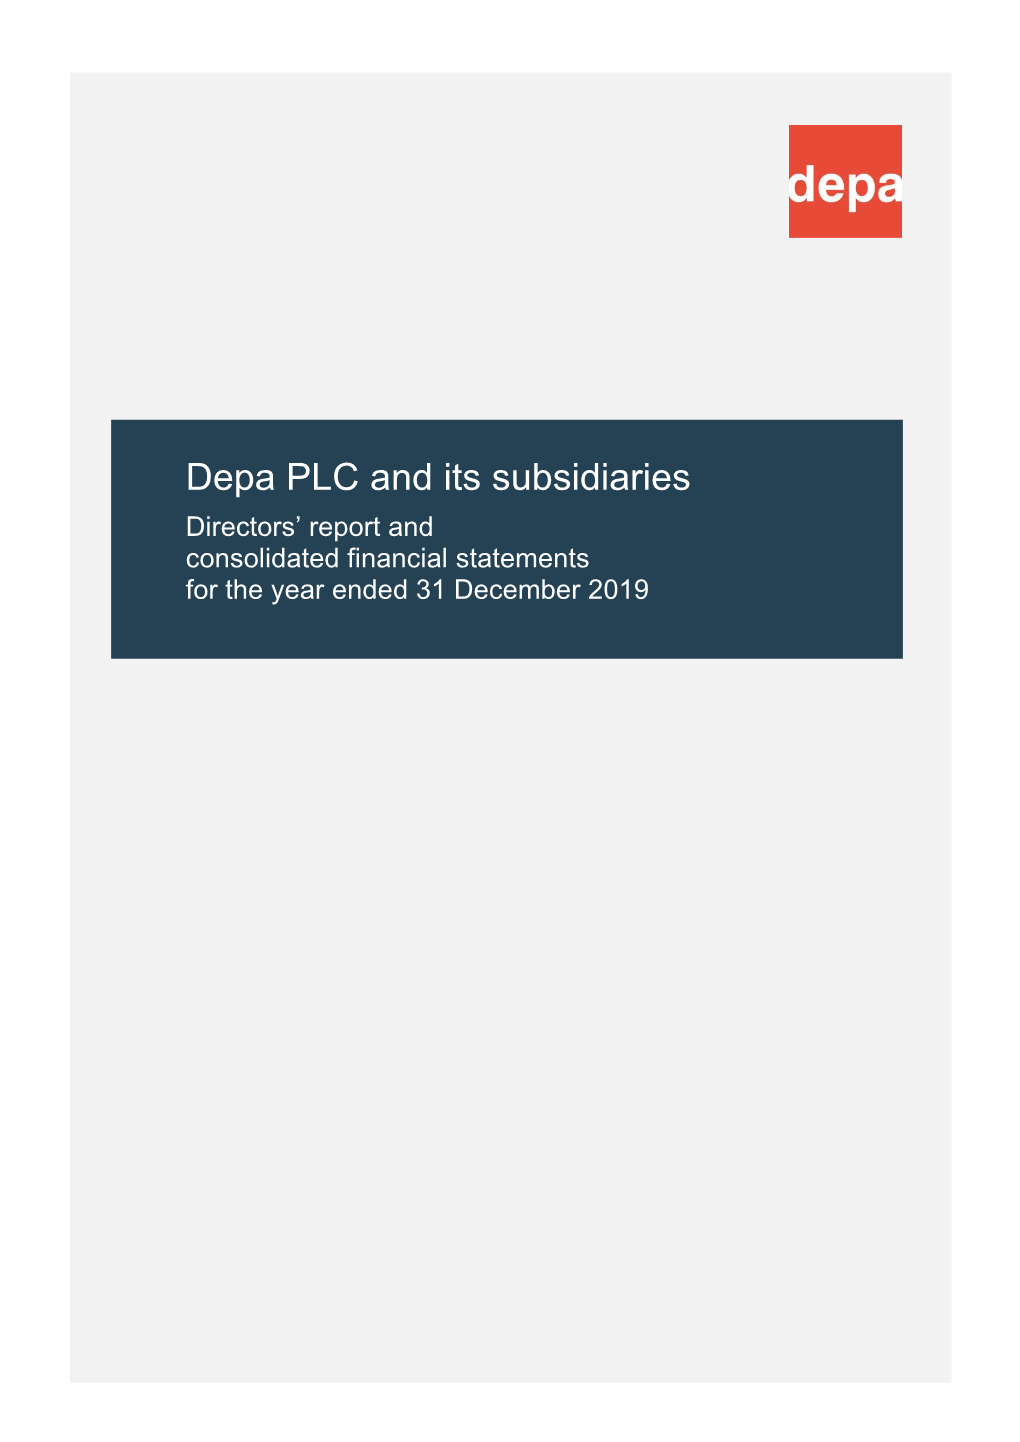 Depa PLC and Its Subsidiaries Directors’ Report and Consolidated Financial Statements for the Year Ended 31 December 2019